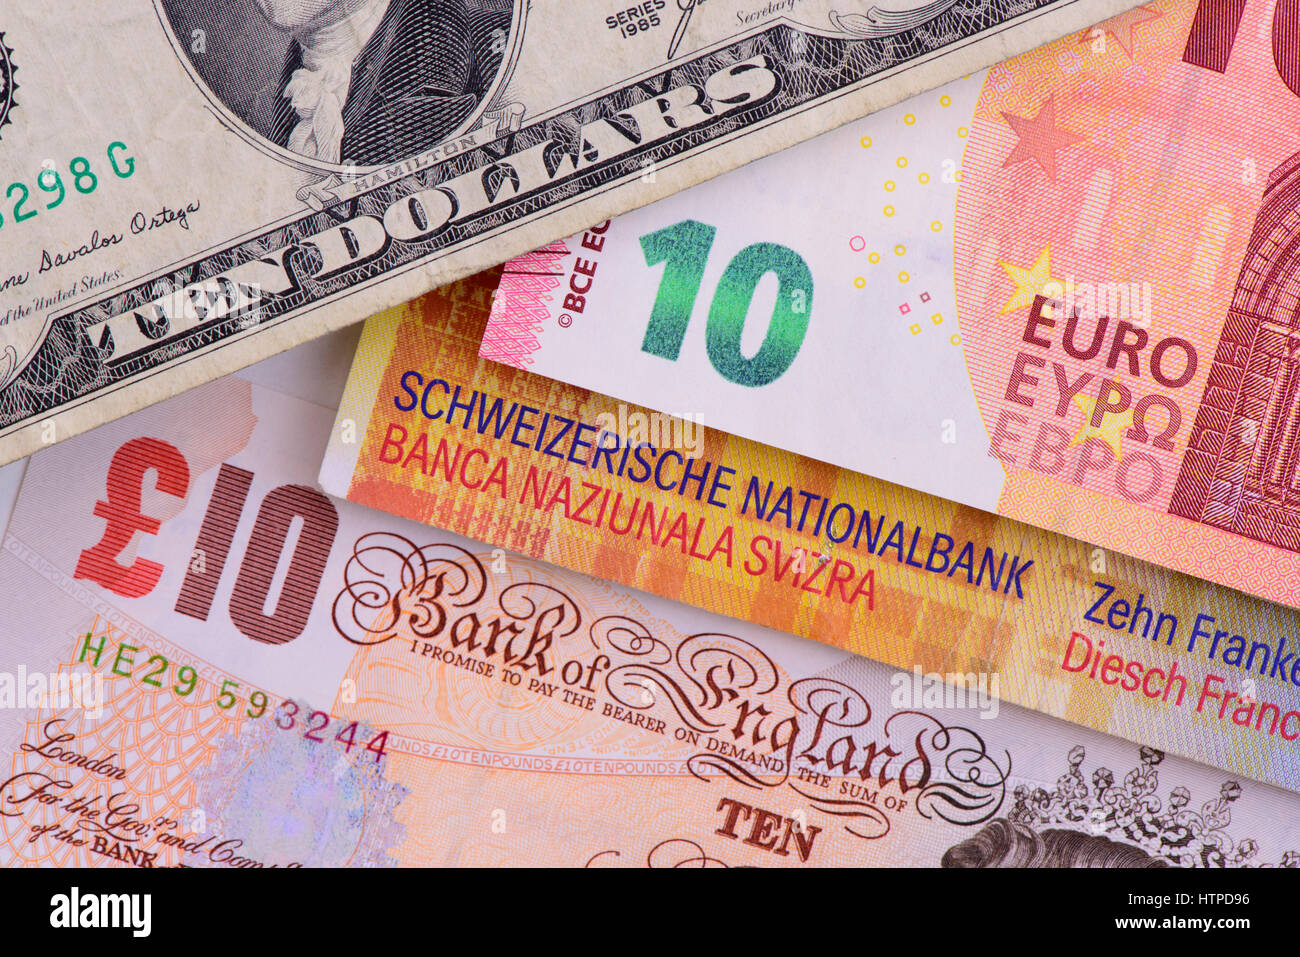 banknotes in different currencies Stock Photo